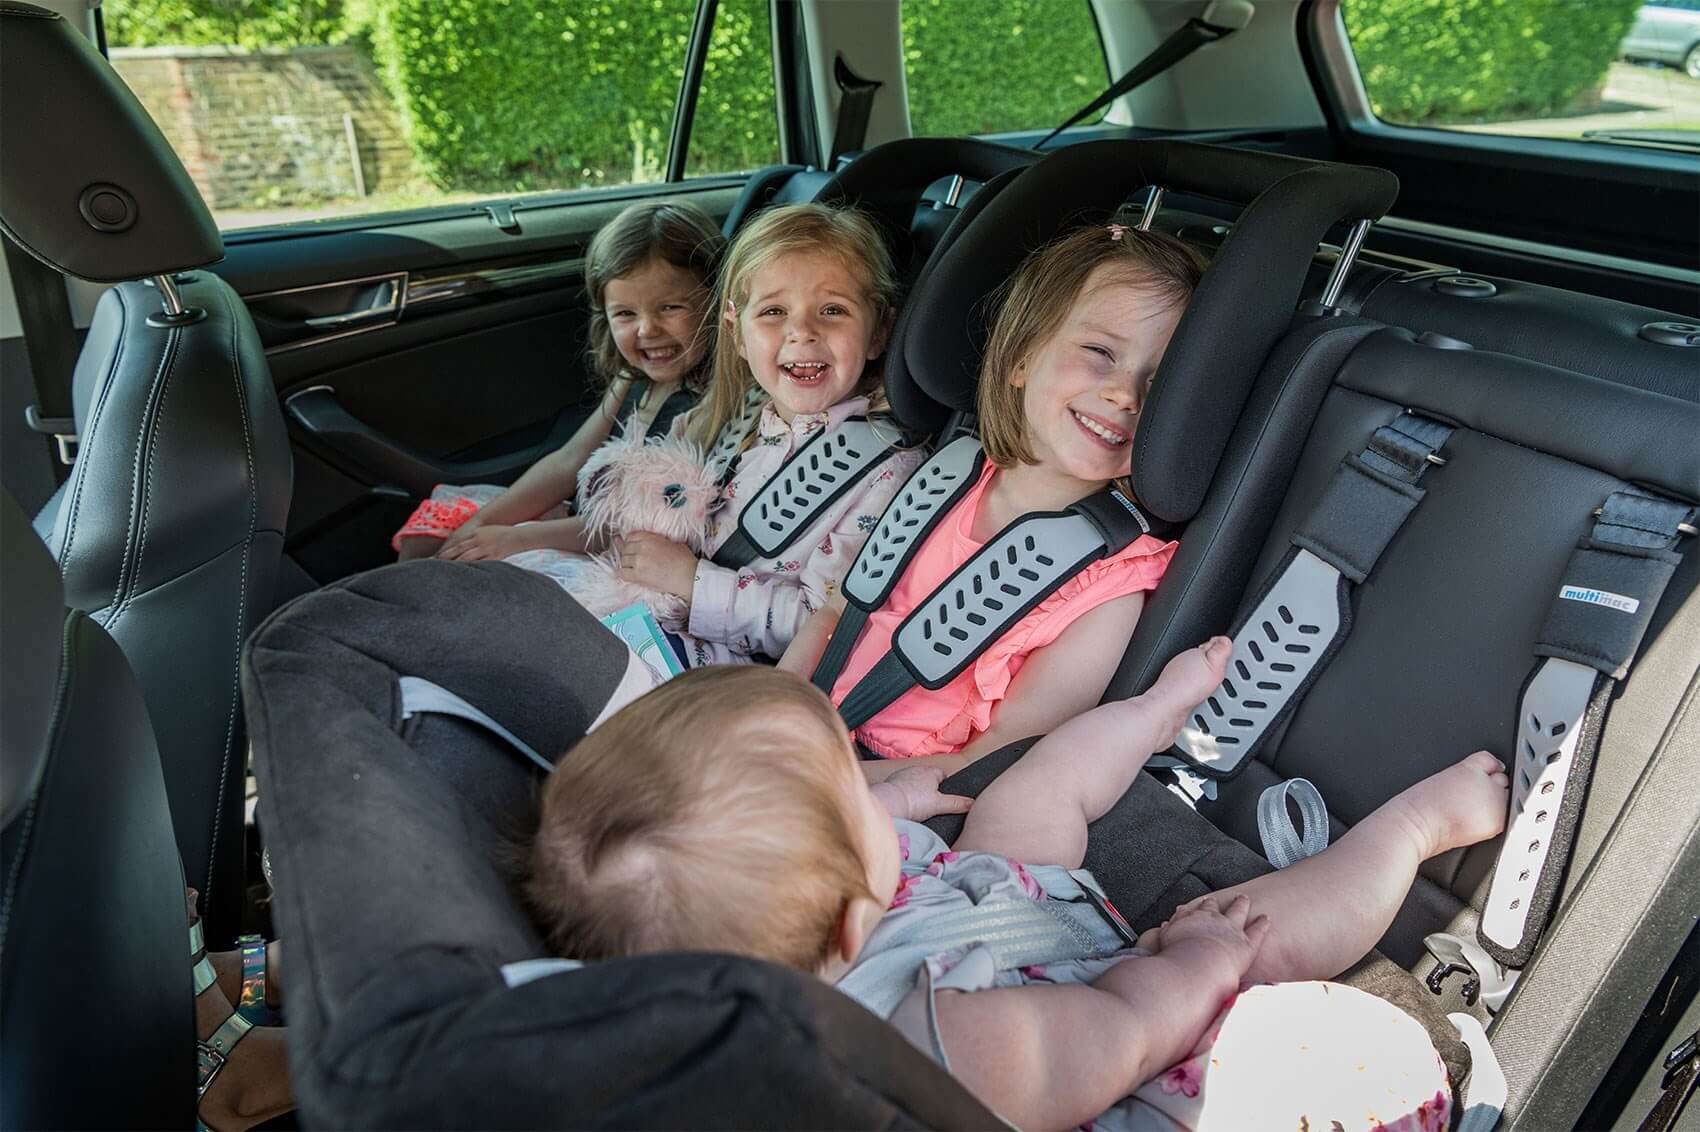 Children-under-8-years-old-must-occupy-the-backseat